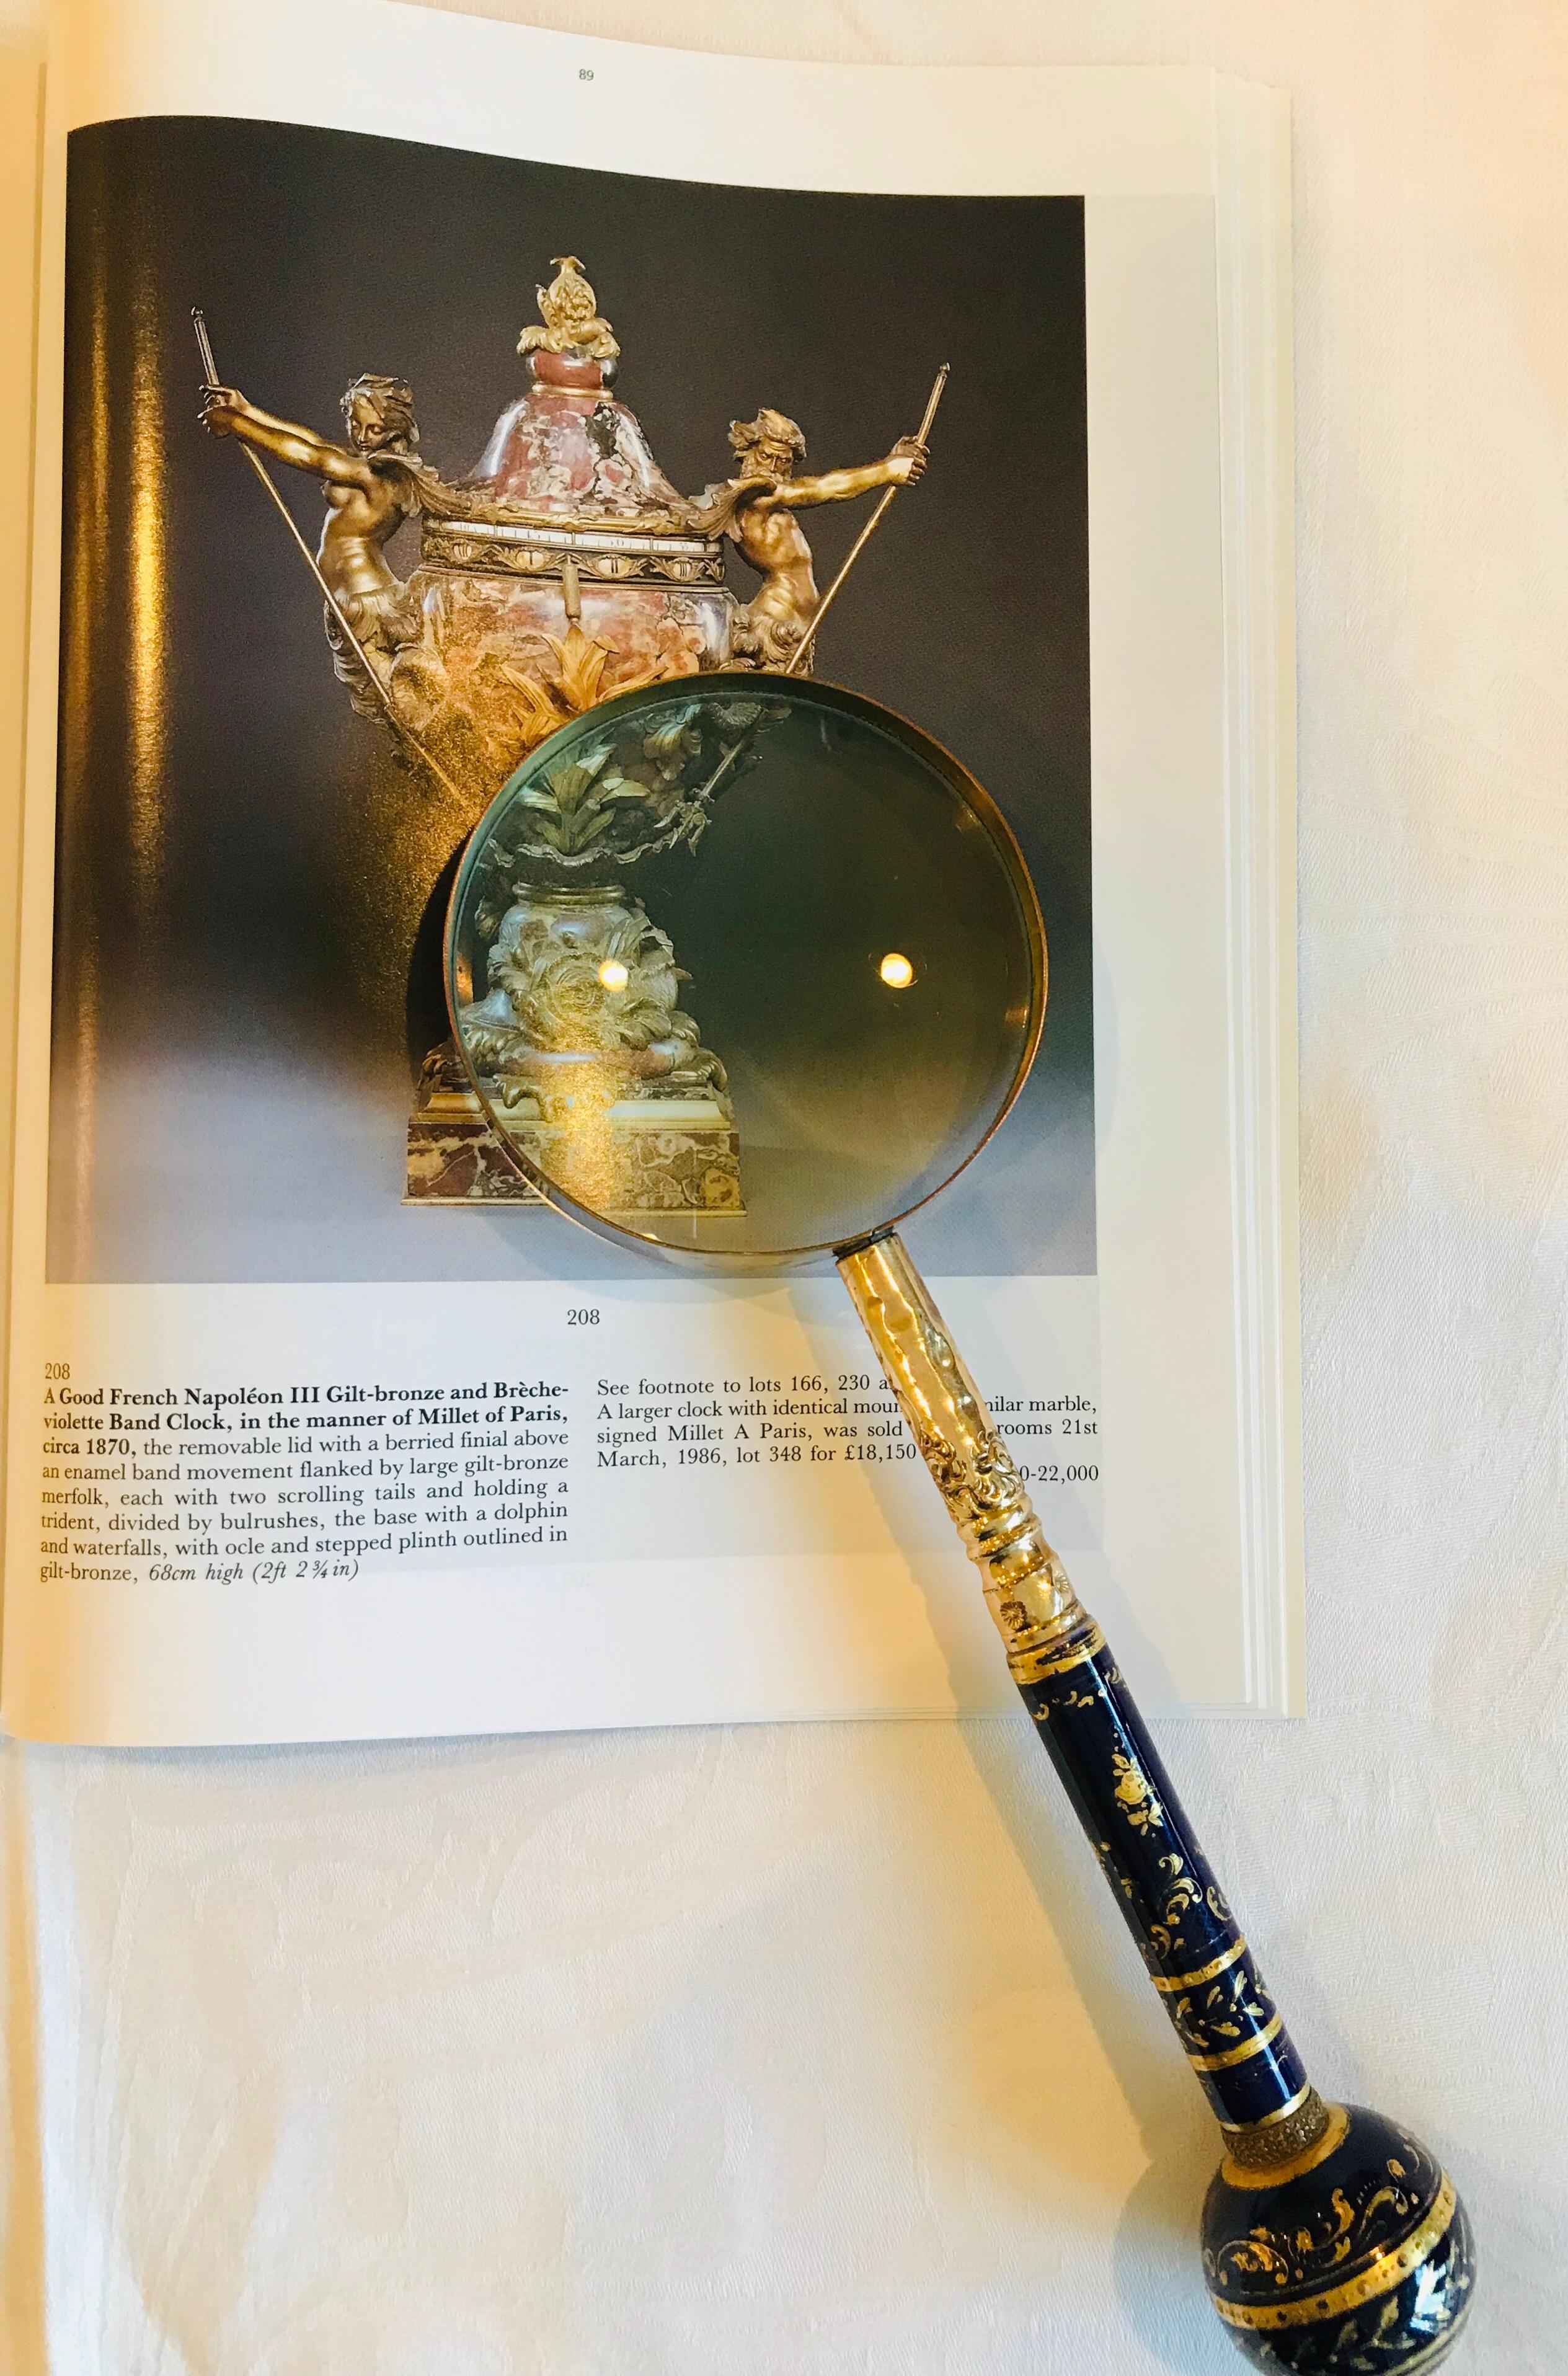 Produced in Limoges, France during the Belle Époque, this cobalt porcelain magnifying glass is heavily encrusted with a raised gold design depicting abstract arabesques and flowers. 

Personalized for the buyer, the round bulb at the end of the